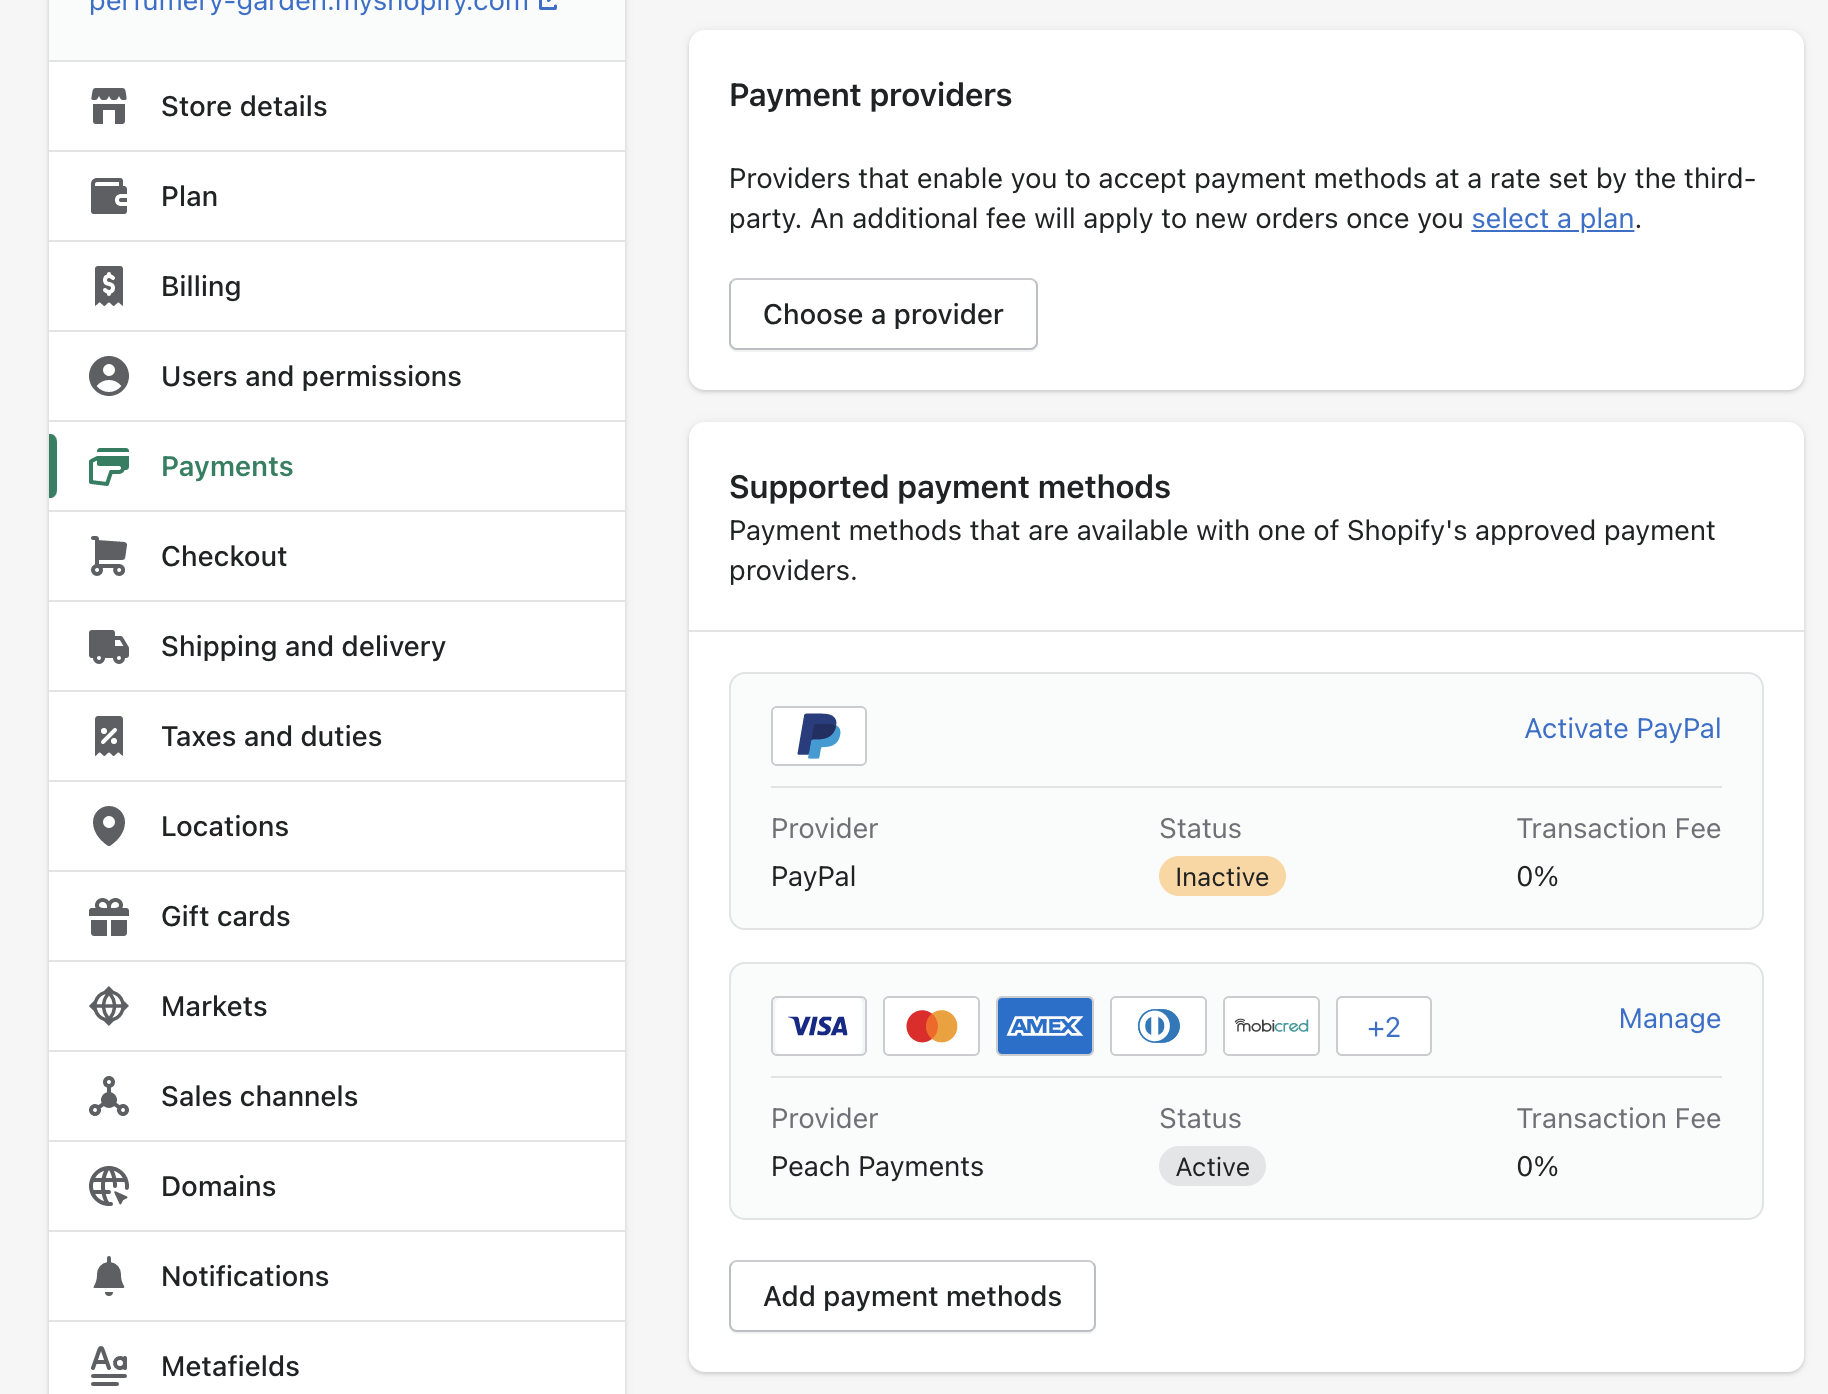 Supported payment methods